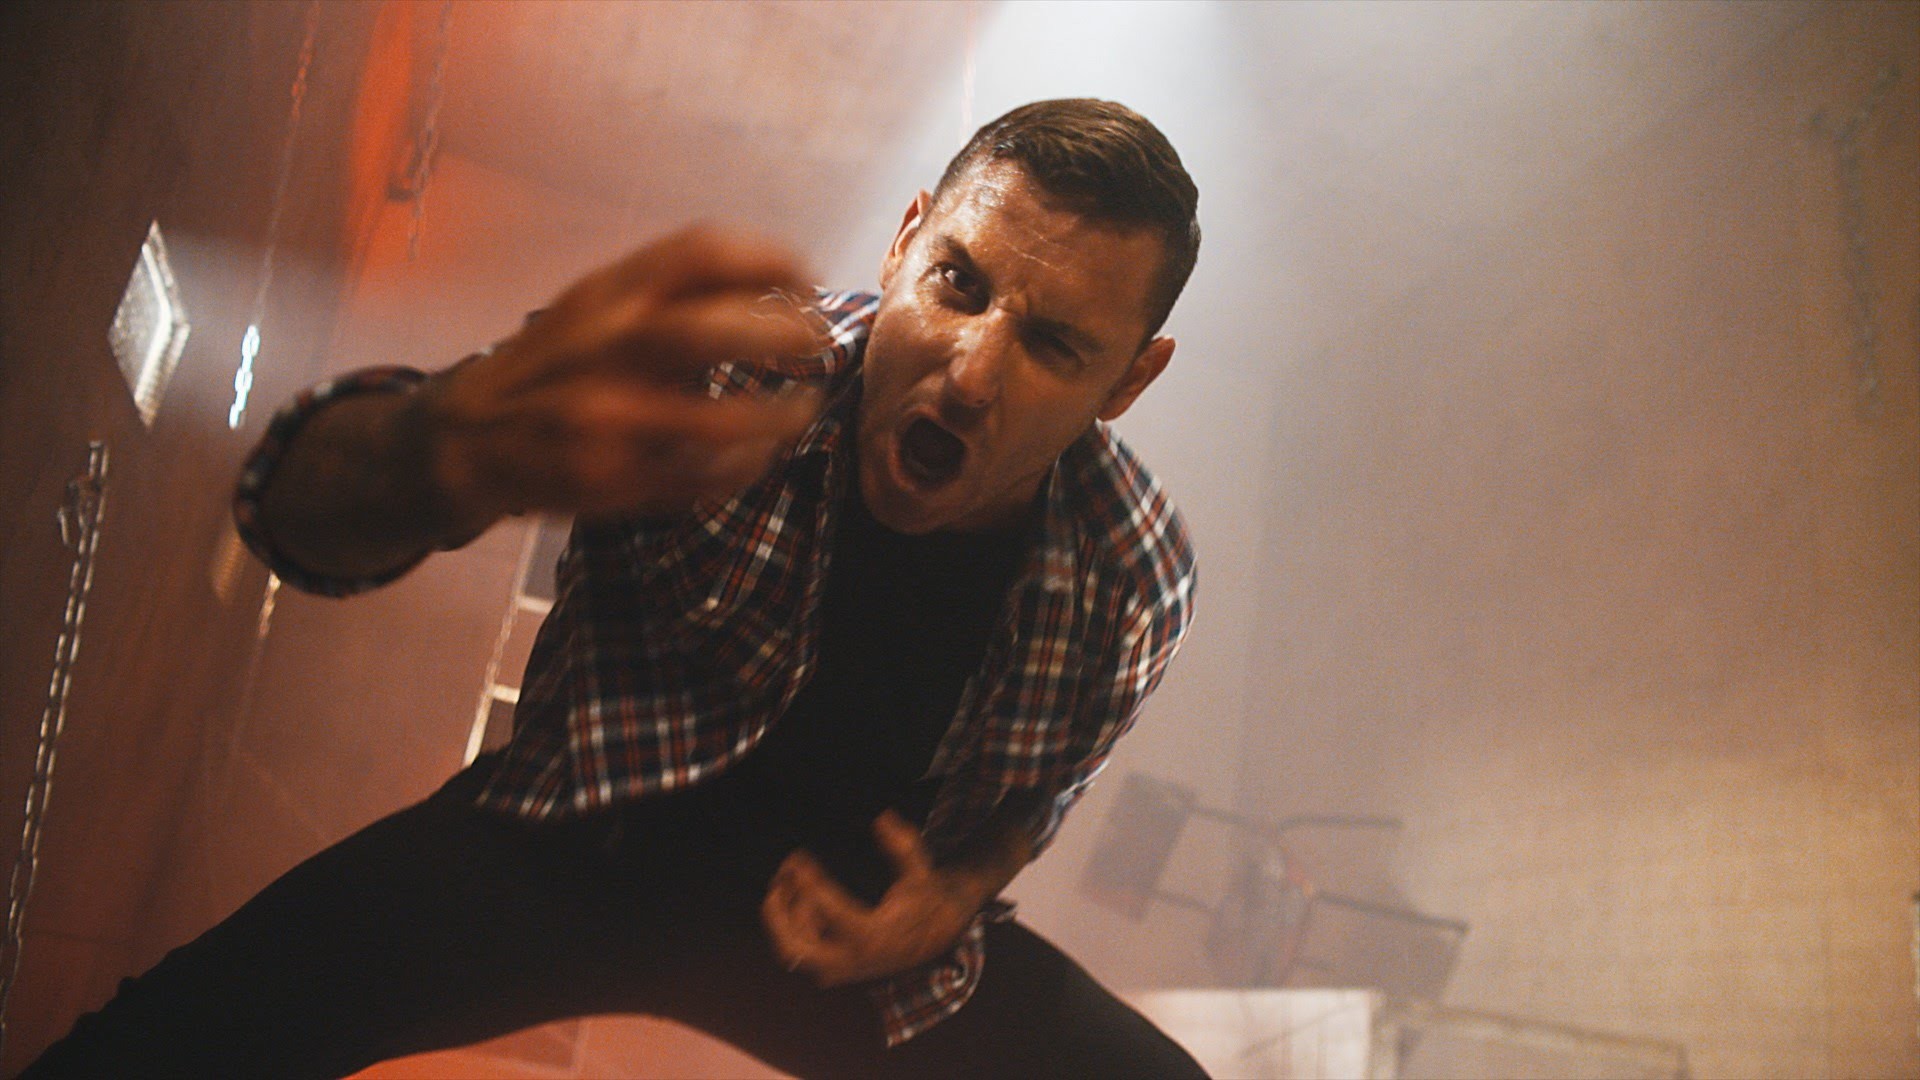 1920x1080 Miss May I, Thy Art Is Murder added to Parkway Drive's